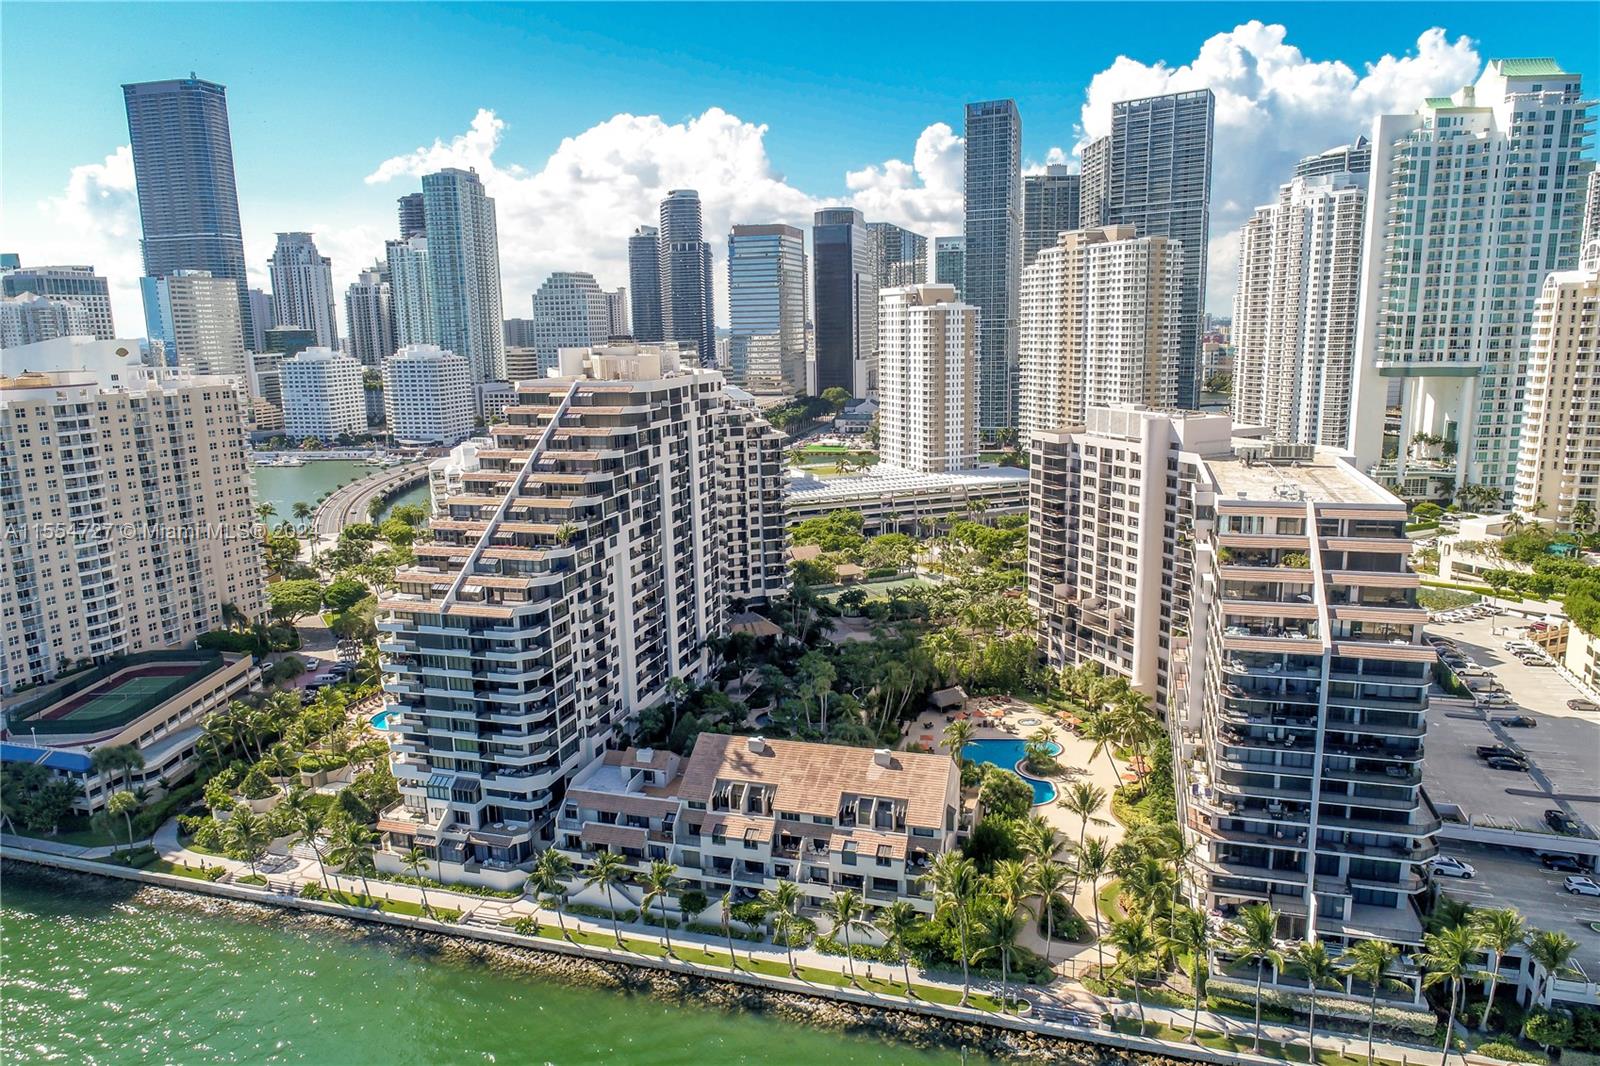 Beautiful 1bdrm 1 1/2bth condo with view of Brickell Key. Remodeled with Spanish tiles
in bathrooms, gorgeous Italian kitchen cabinets with granite countertop and stainless steel appliances. Remodeled
Spanish baths with tub and shower. Building amenities includes: swimming pool, jacuzzi, sauna, gym, racquetball,
tennis, basketball, and 24 hours security, valet, and concierge. Located in private Brickell Key Island minutes to
Mary Brickell Village, Downtown, Airport, SoBe.